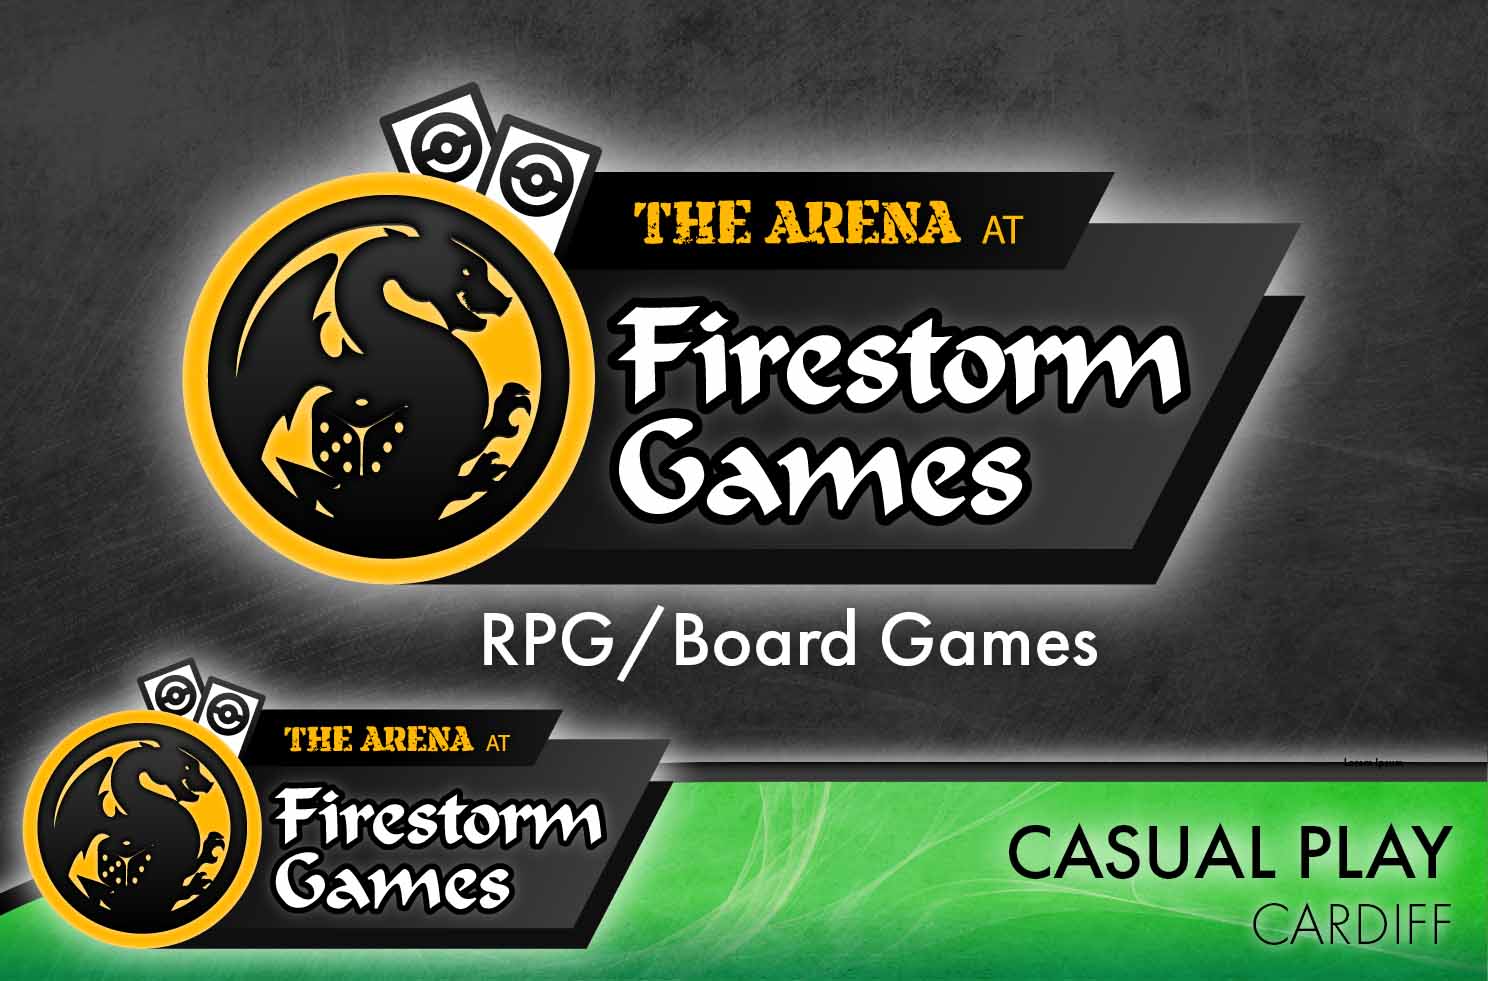 The Arena Tuesday RPG/Board Game Ticket